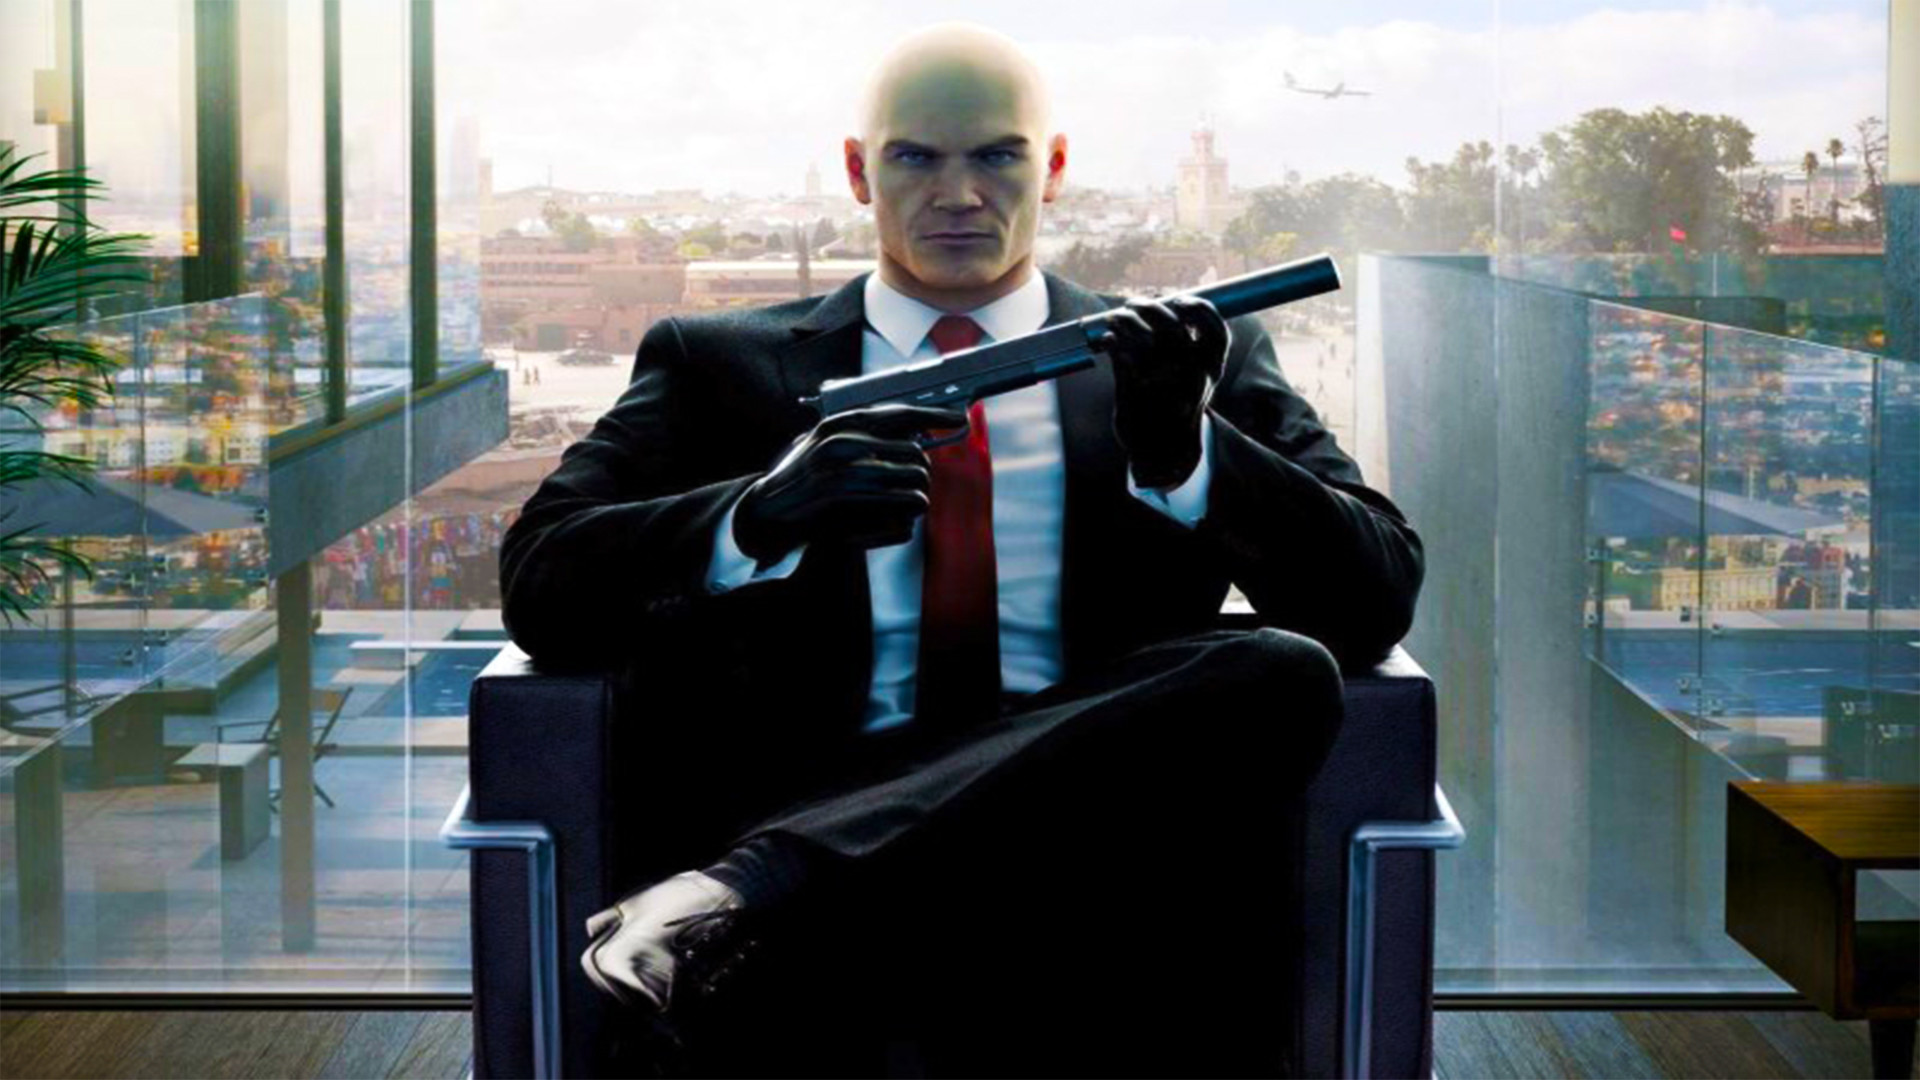 Hitman Blood Money Wallpapers (72+ images)